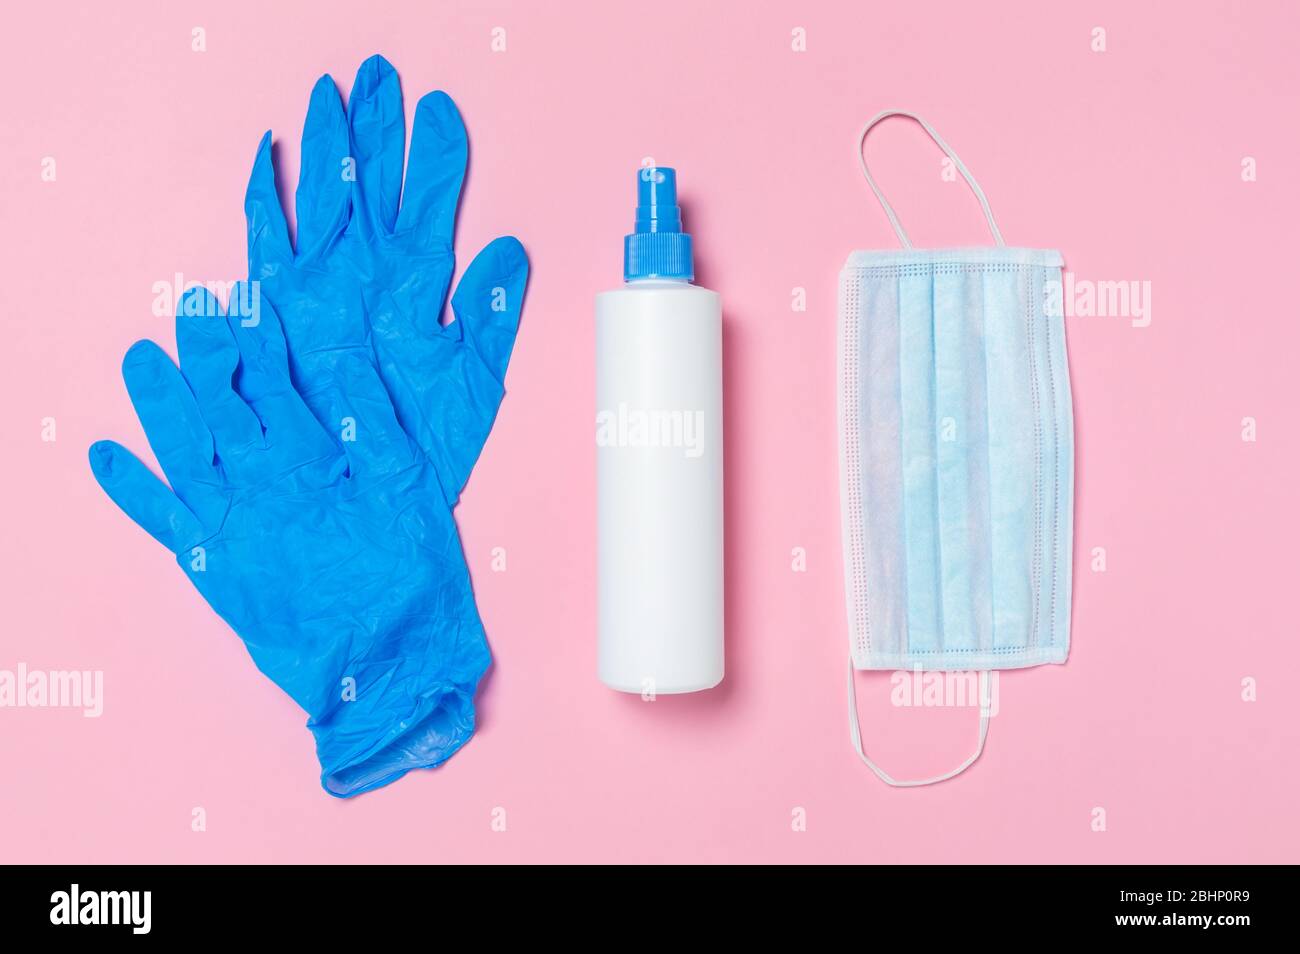 Coronavirus protection. Medical surgical mask, disinfectant or hand sanitizer and blue disposable gloves on pink background. Hygiene measures to preve Stock Photo